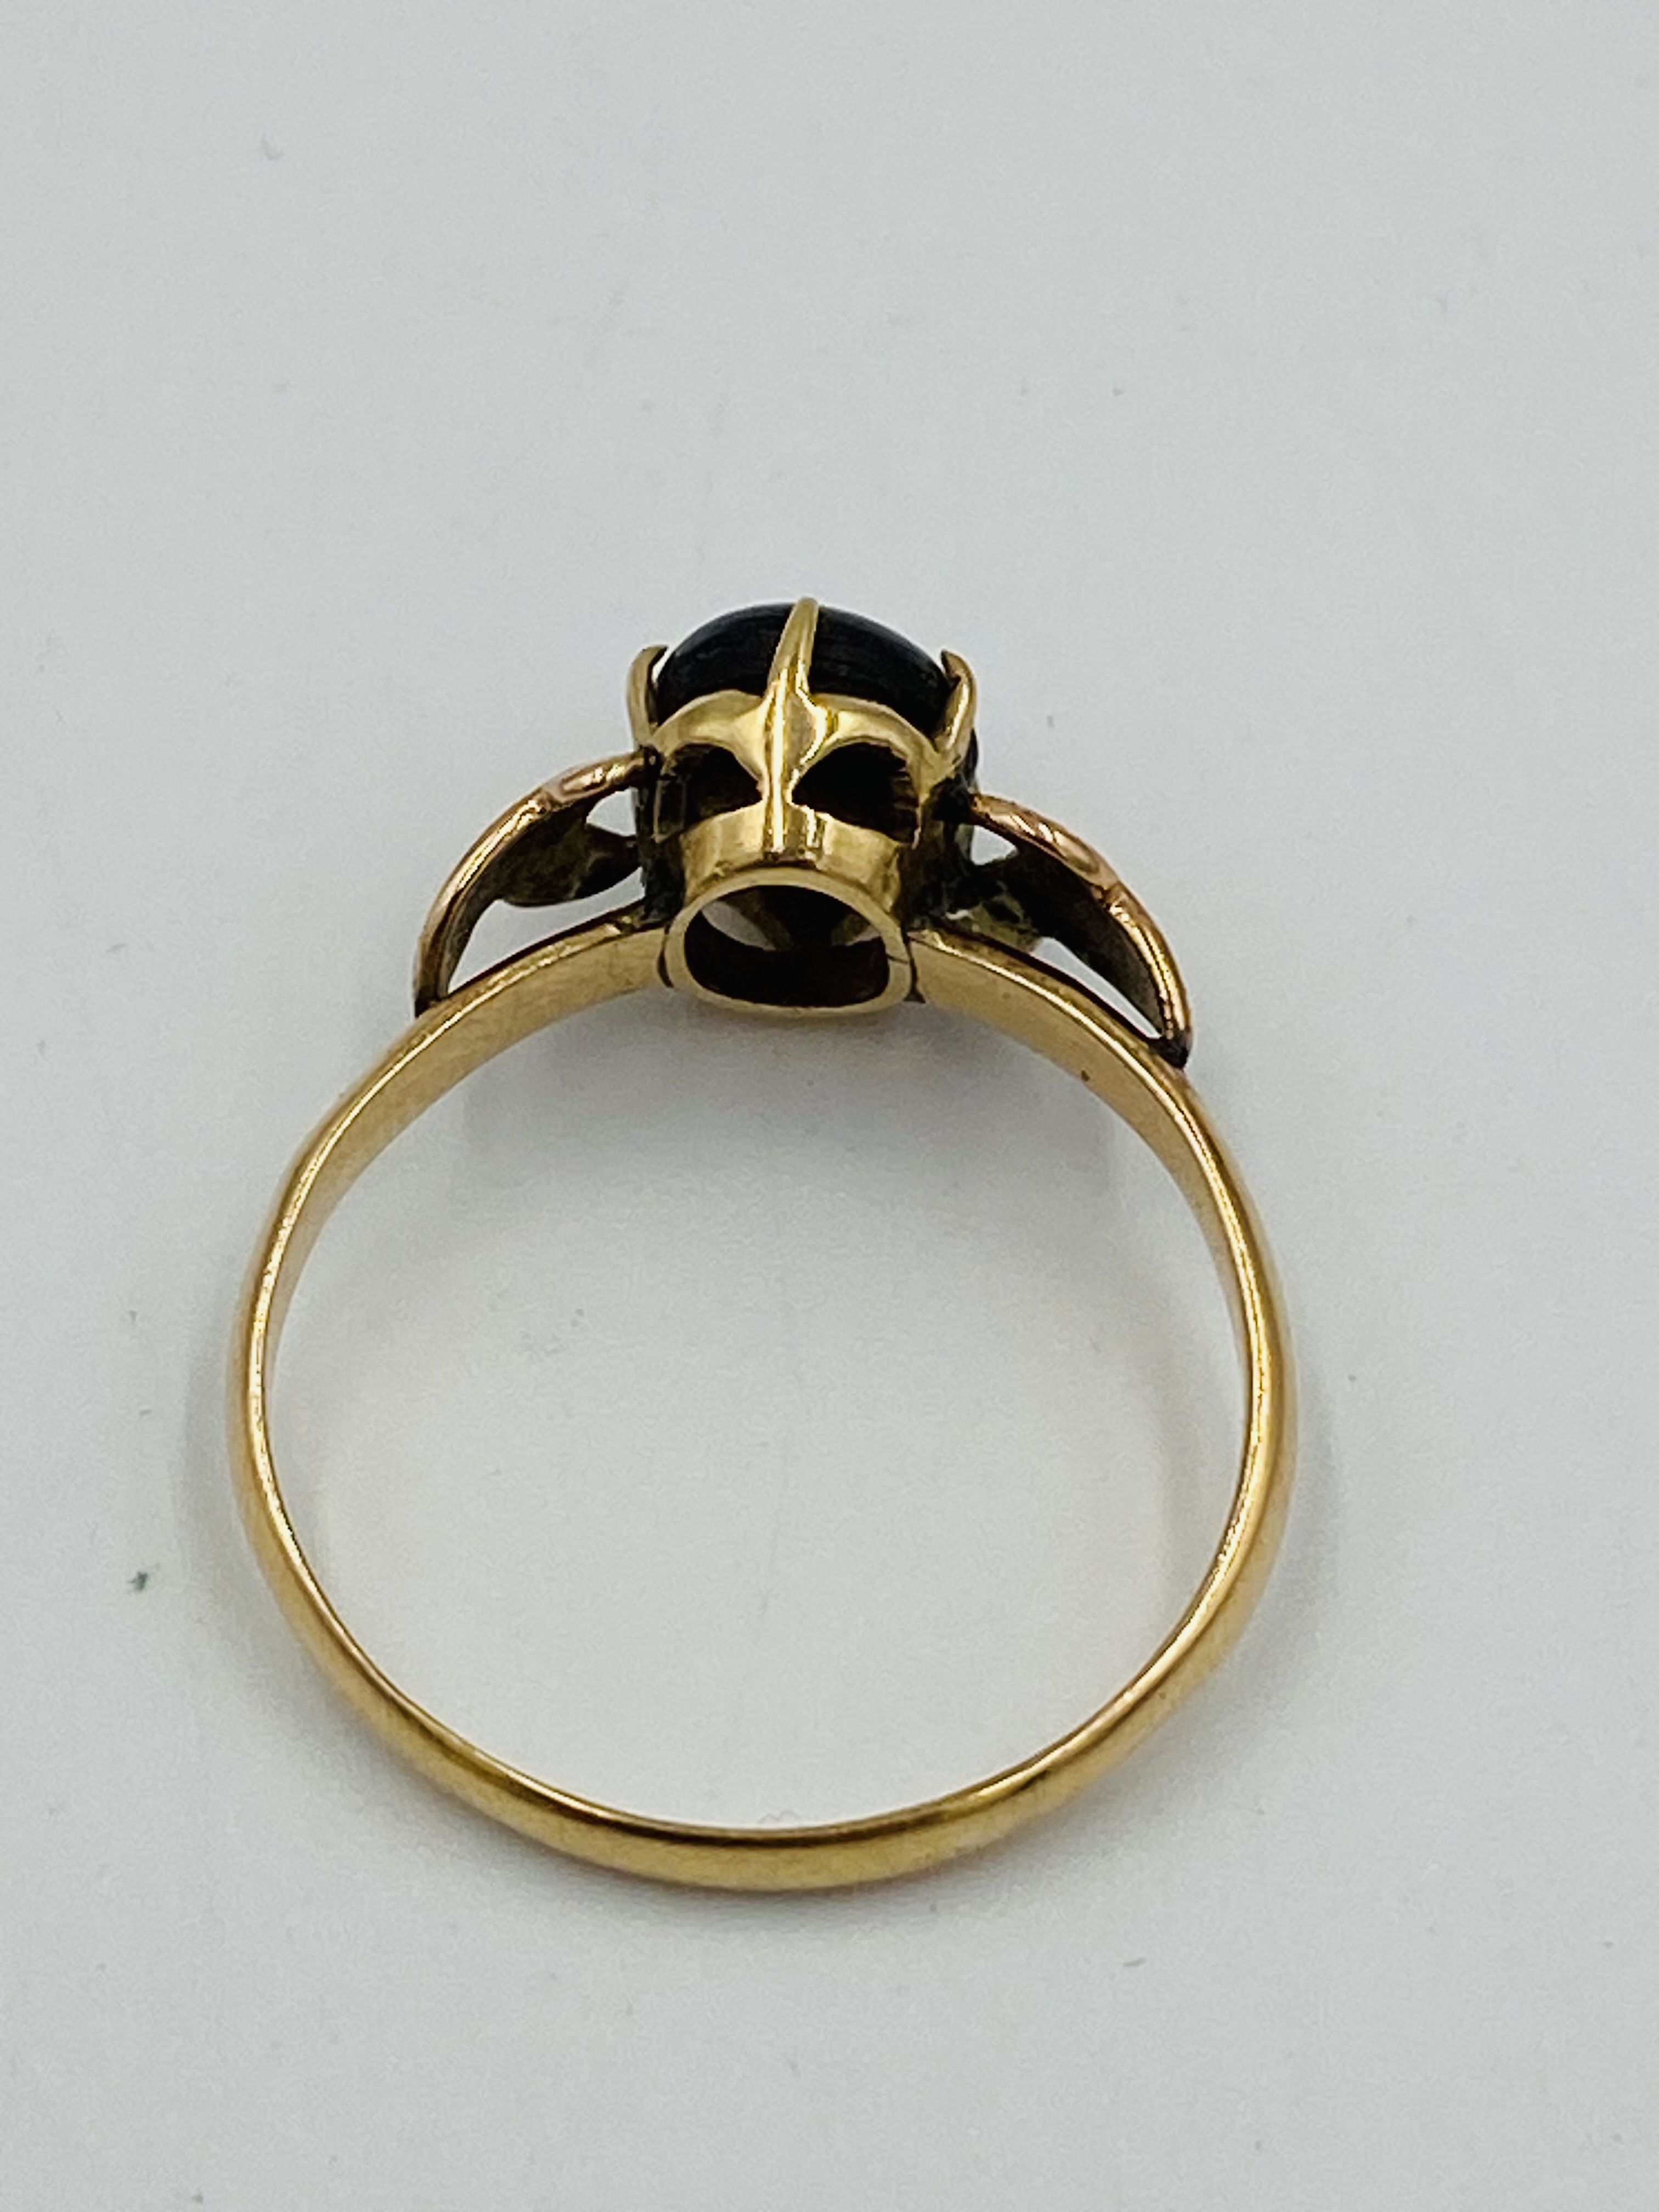 9ct gold ring set with a sapphire cabochon - Image 7 of 9